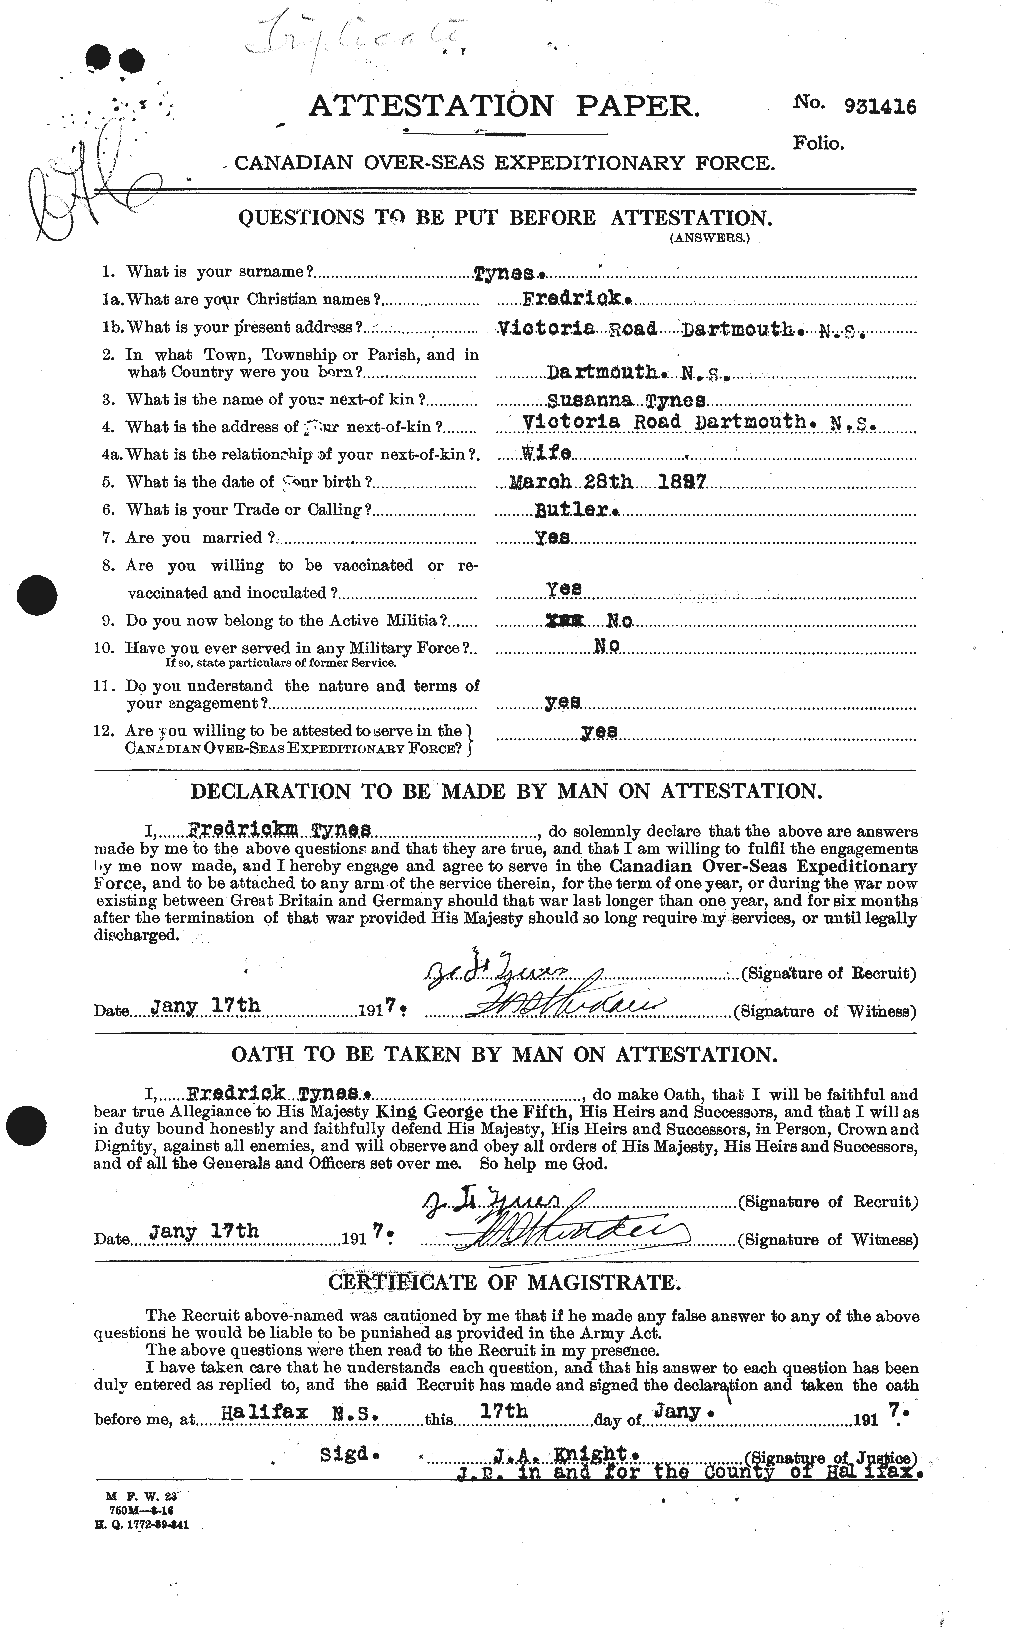 Personnel Records of the First World War - CEF 644537a